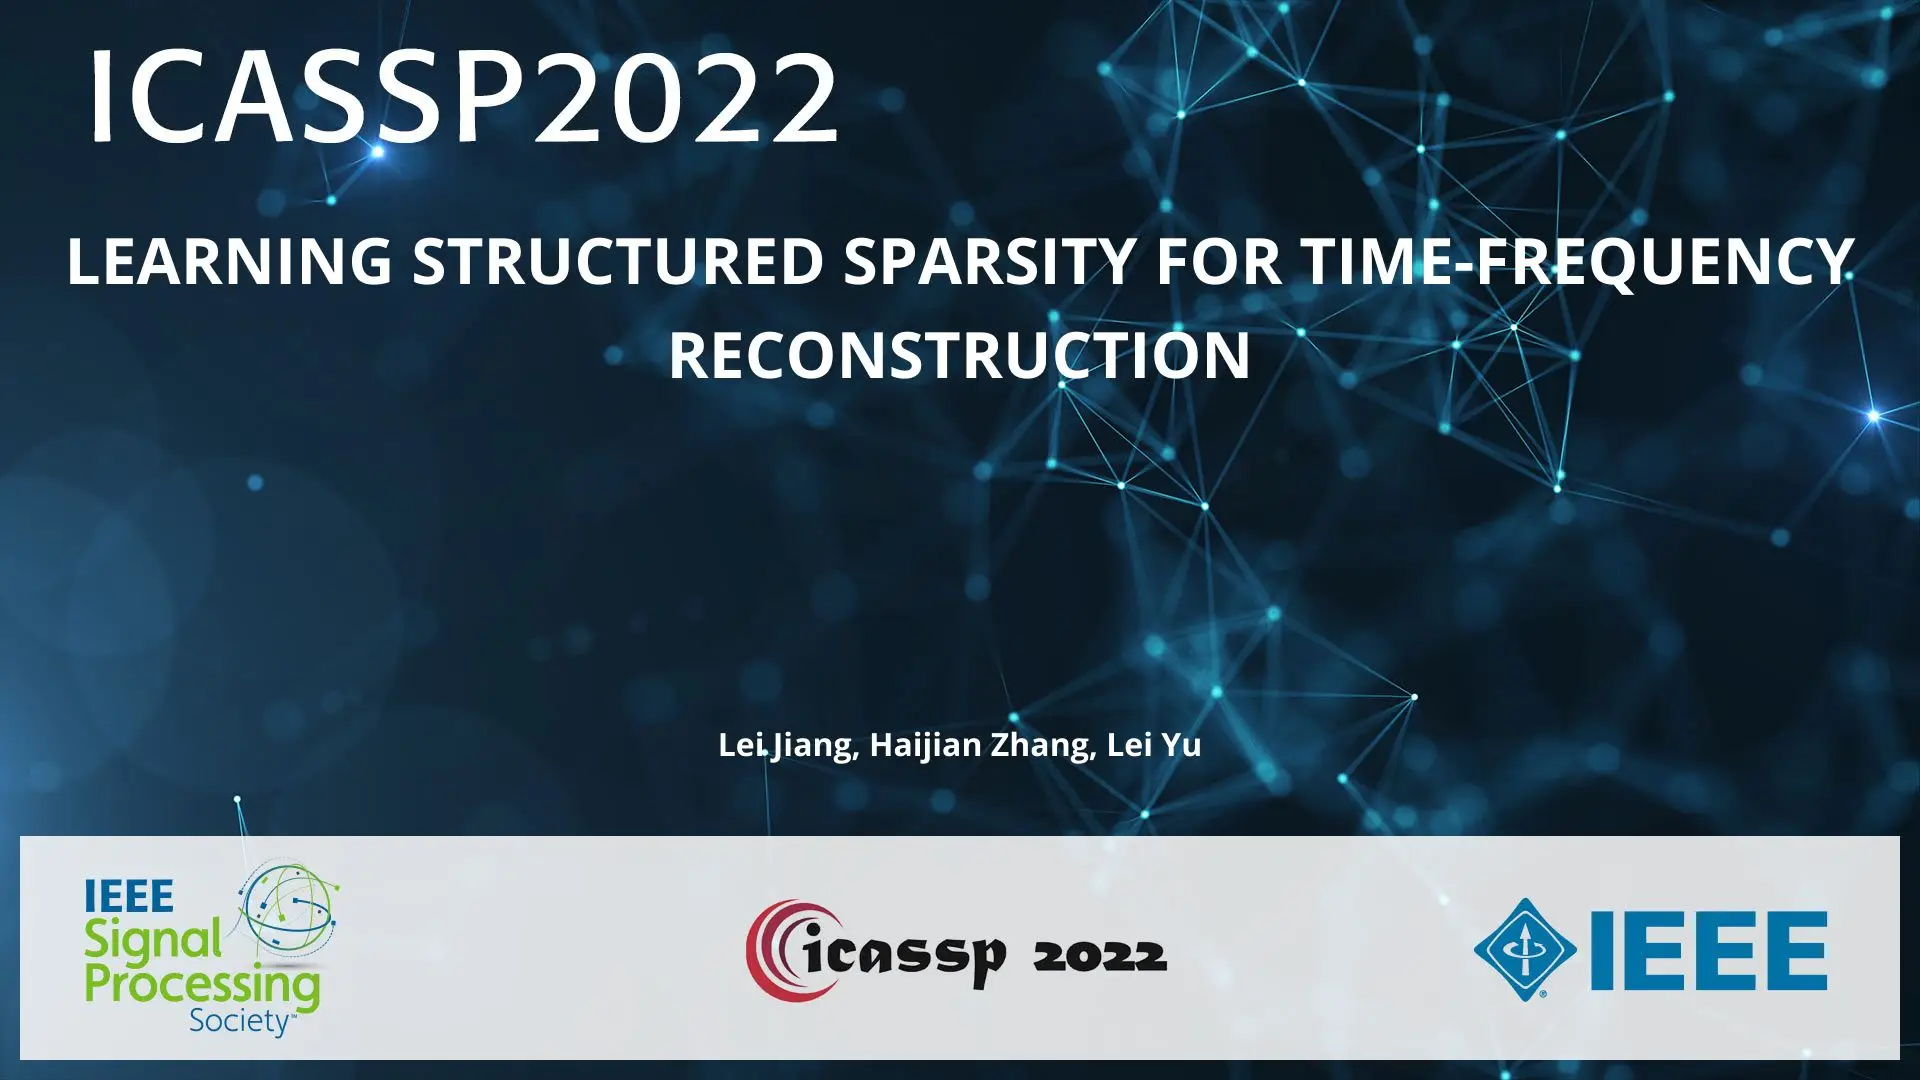 LEARNING STRUCTURED SPARSITY FOR TIME-FREQUENCY RECONSTRUCTION